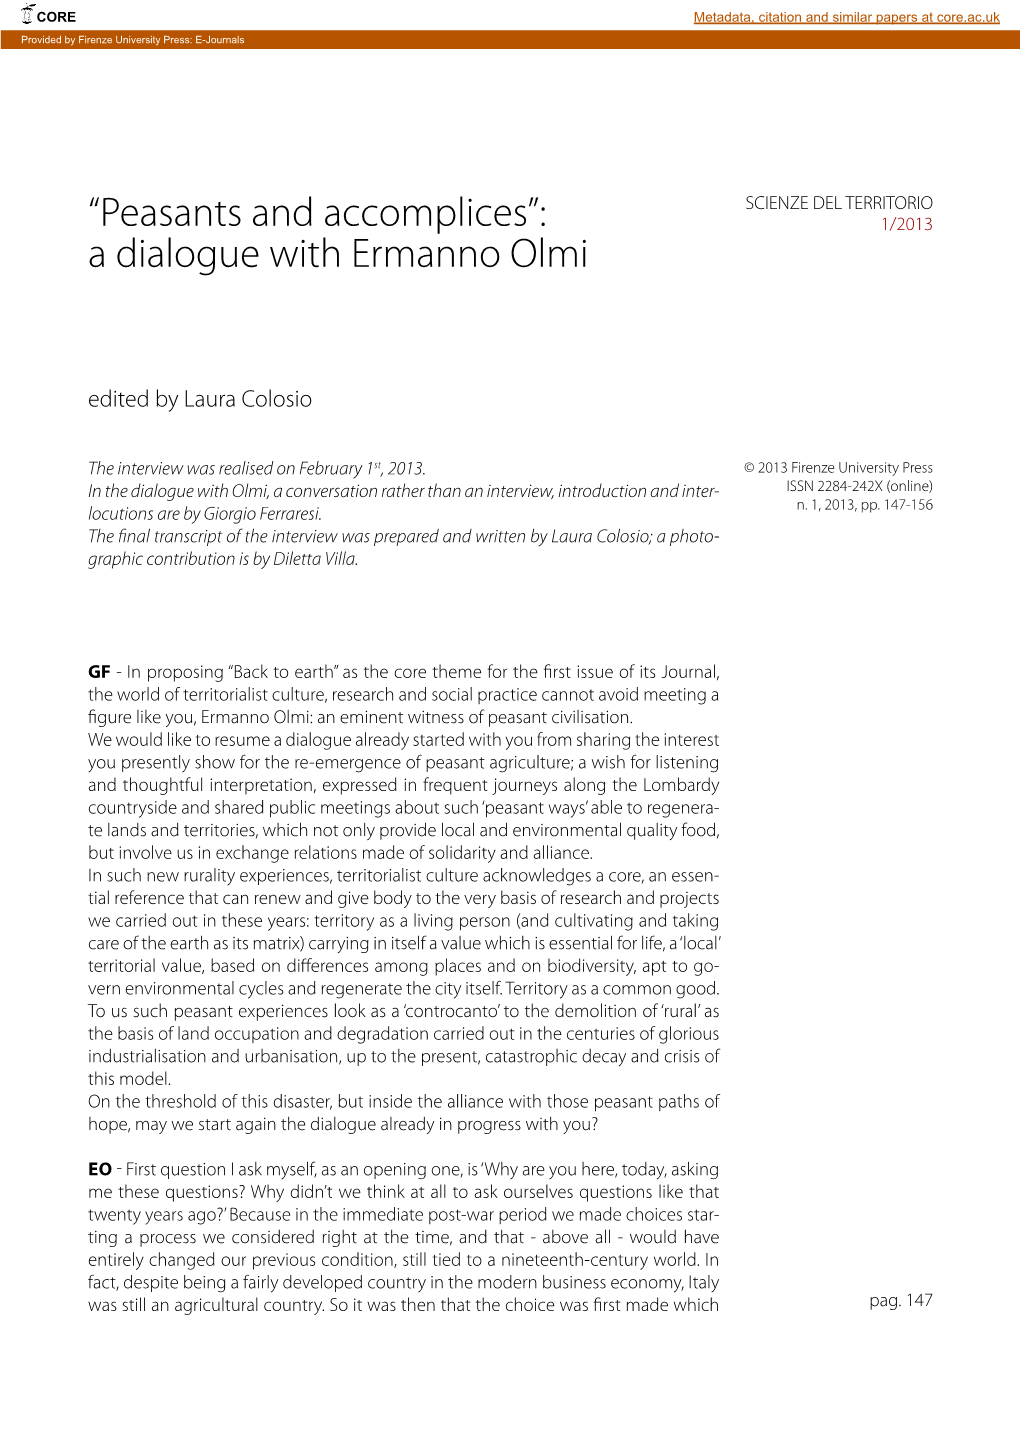 “Peasants and Accomplices”: a Dialogue with Ermanno Olmi